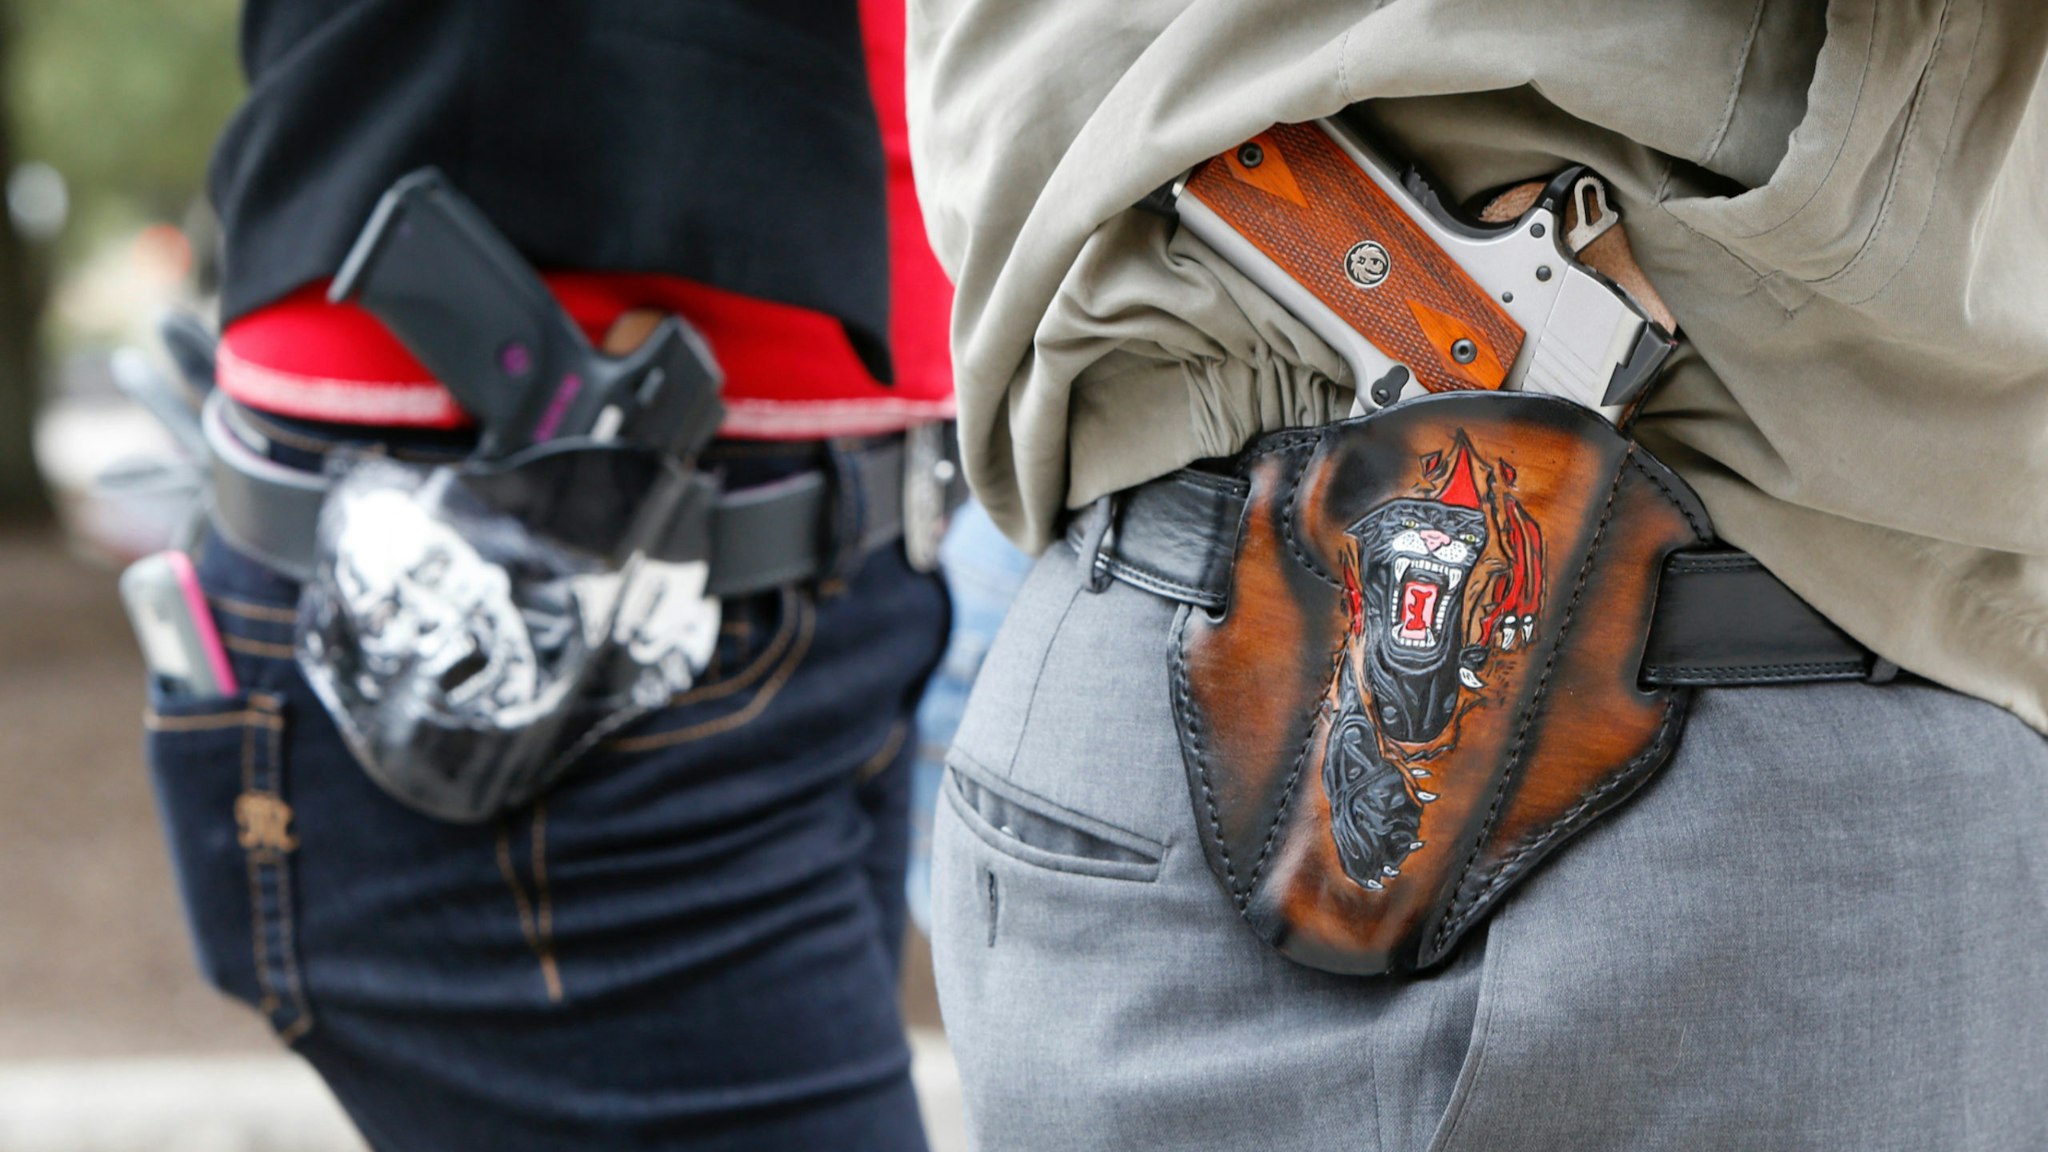 Art and Diana Ramirez of Austin with their pistols in custom-made holsters during and open carry rally at the Texas State Capitol on January 1, 2016 in Austin, Texas.